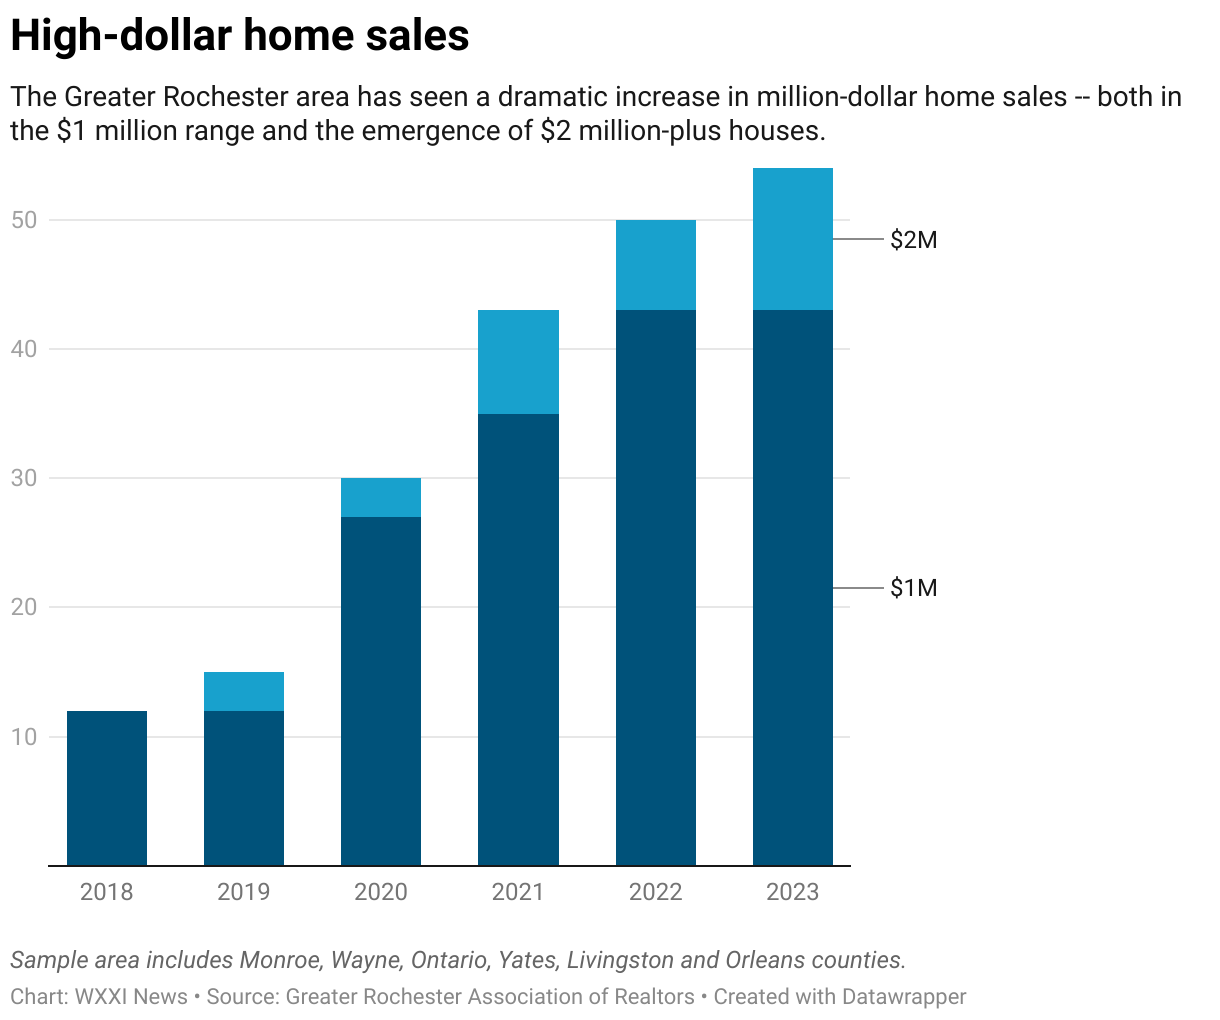 A stacked bar shart shows the number of $1 million and $2 million-plus home sales from 2018 through 2023. Those numbers go from 12 to 54 in that time.